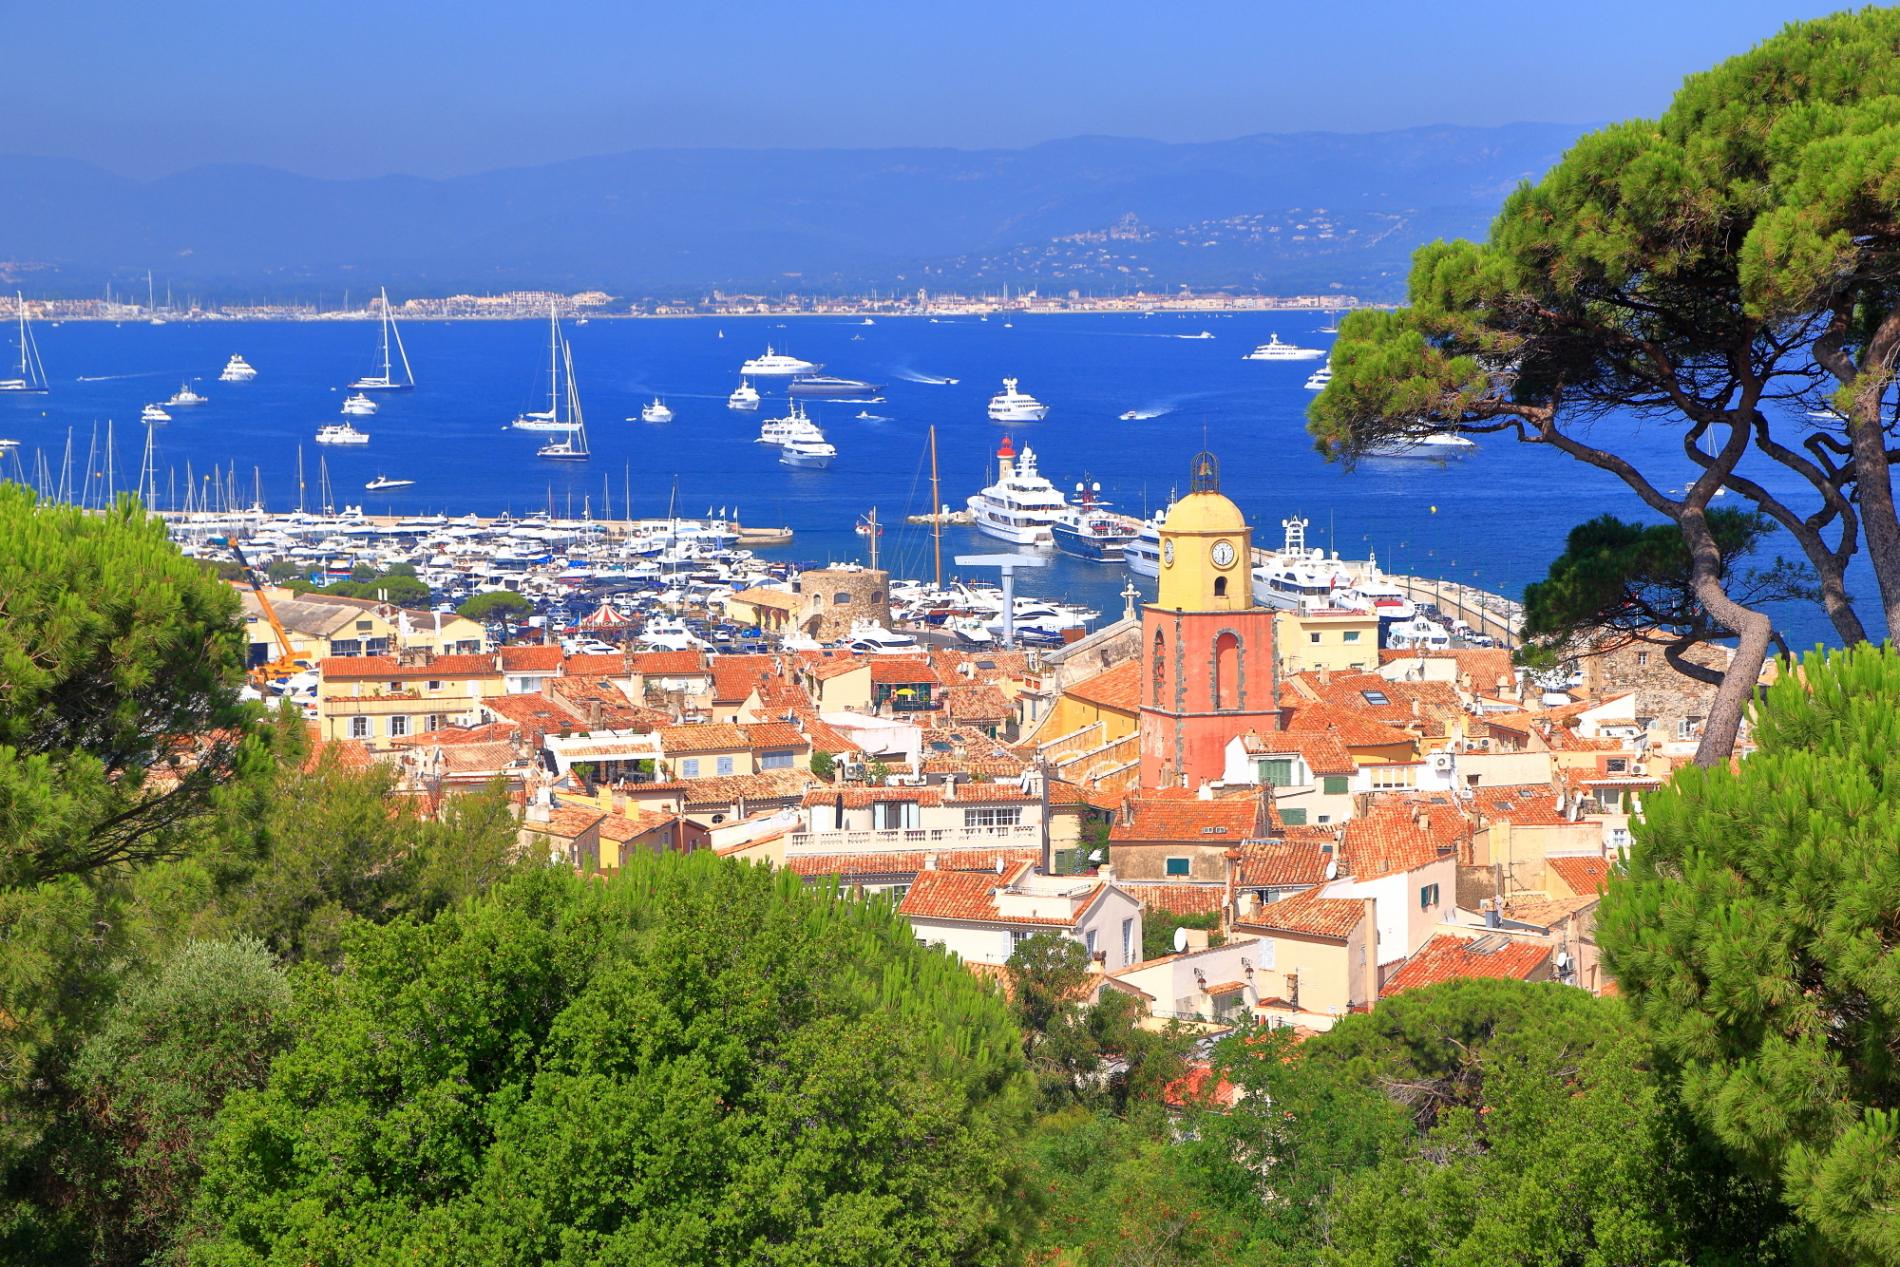 Luxury Charter Itinerary - St Tropez and Porquerolles - 1 Day | C&N